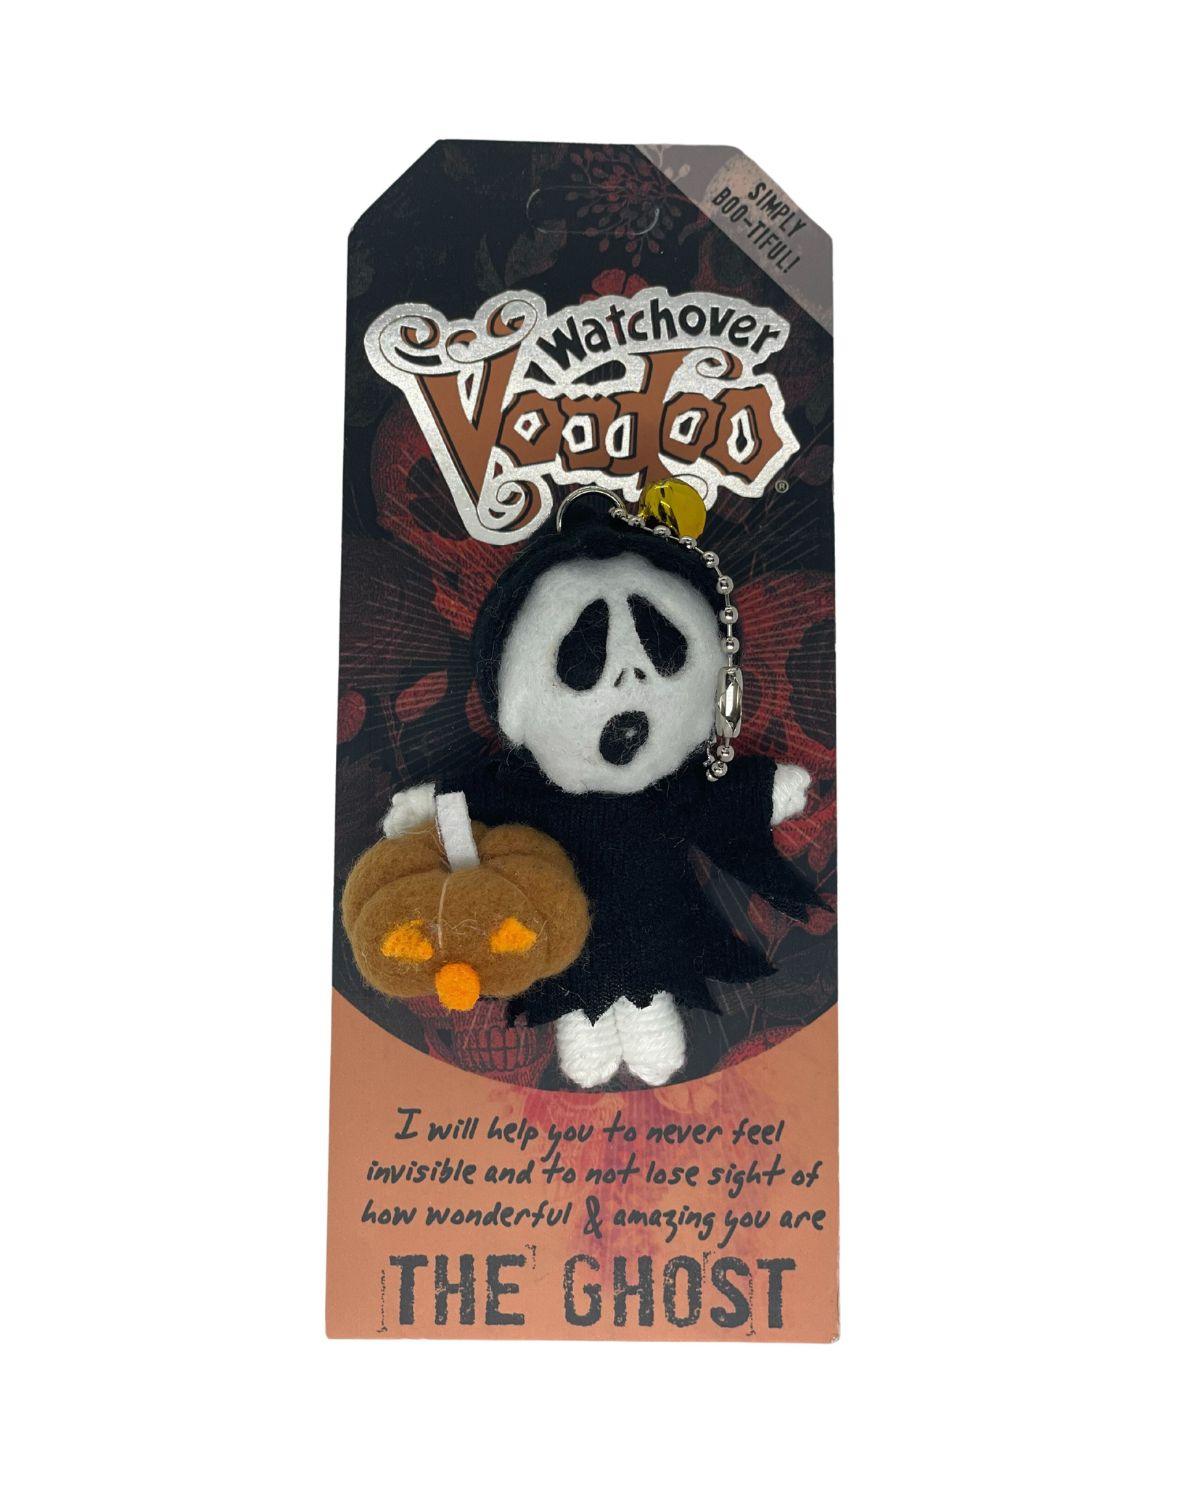 Watchover Voodoo Doll - The Ghost - Watchover Voodoo - String Doll